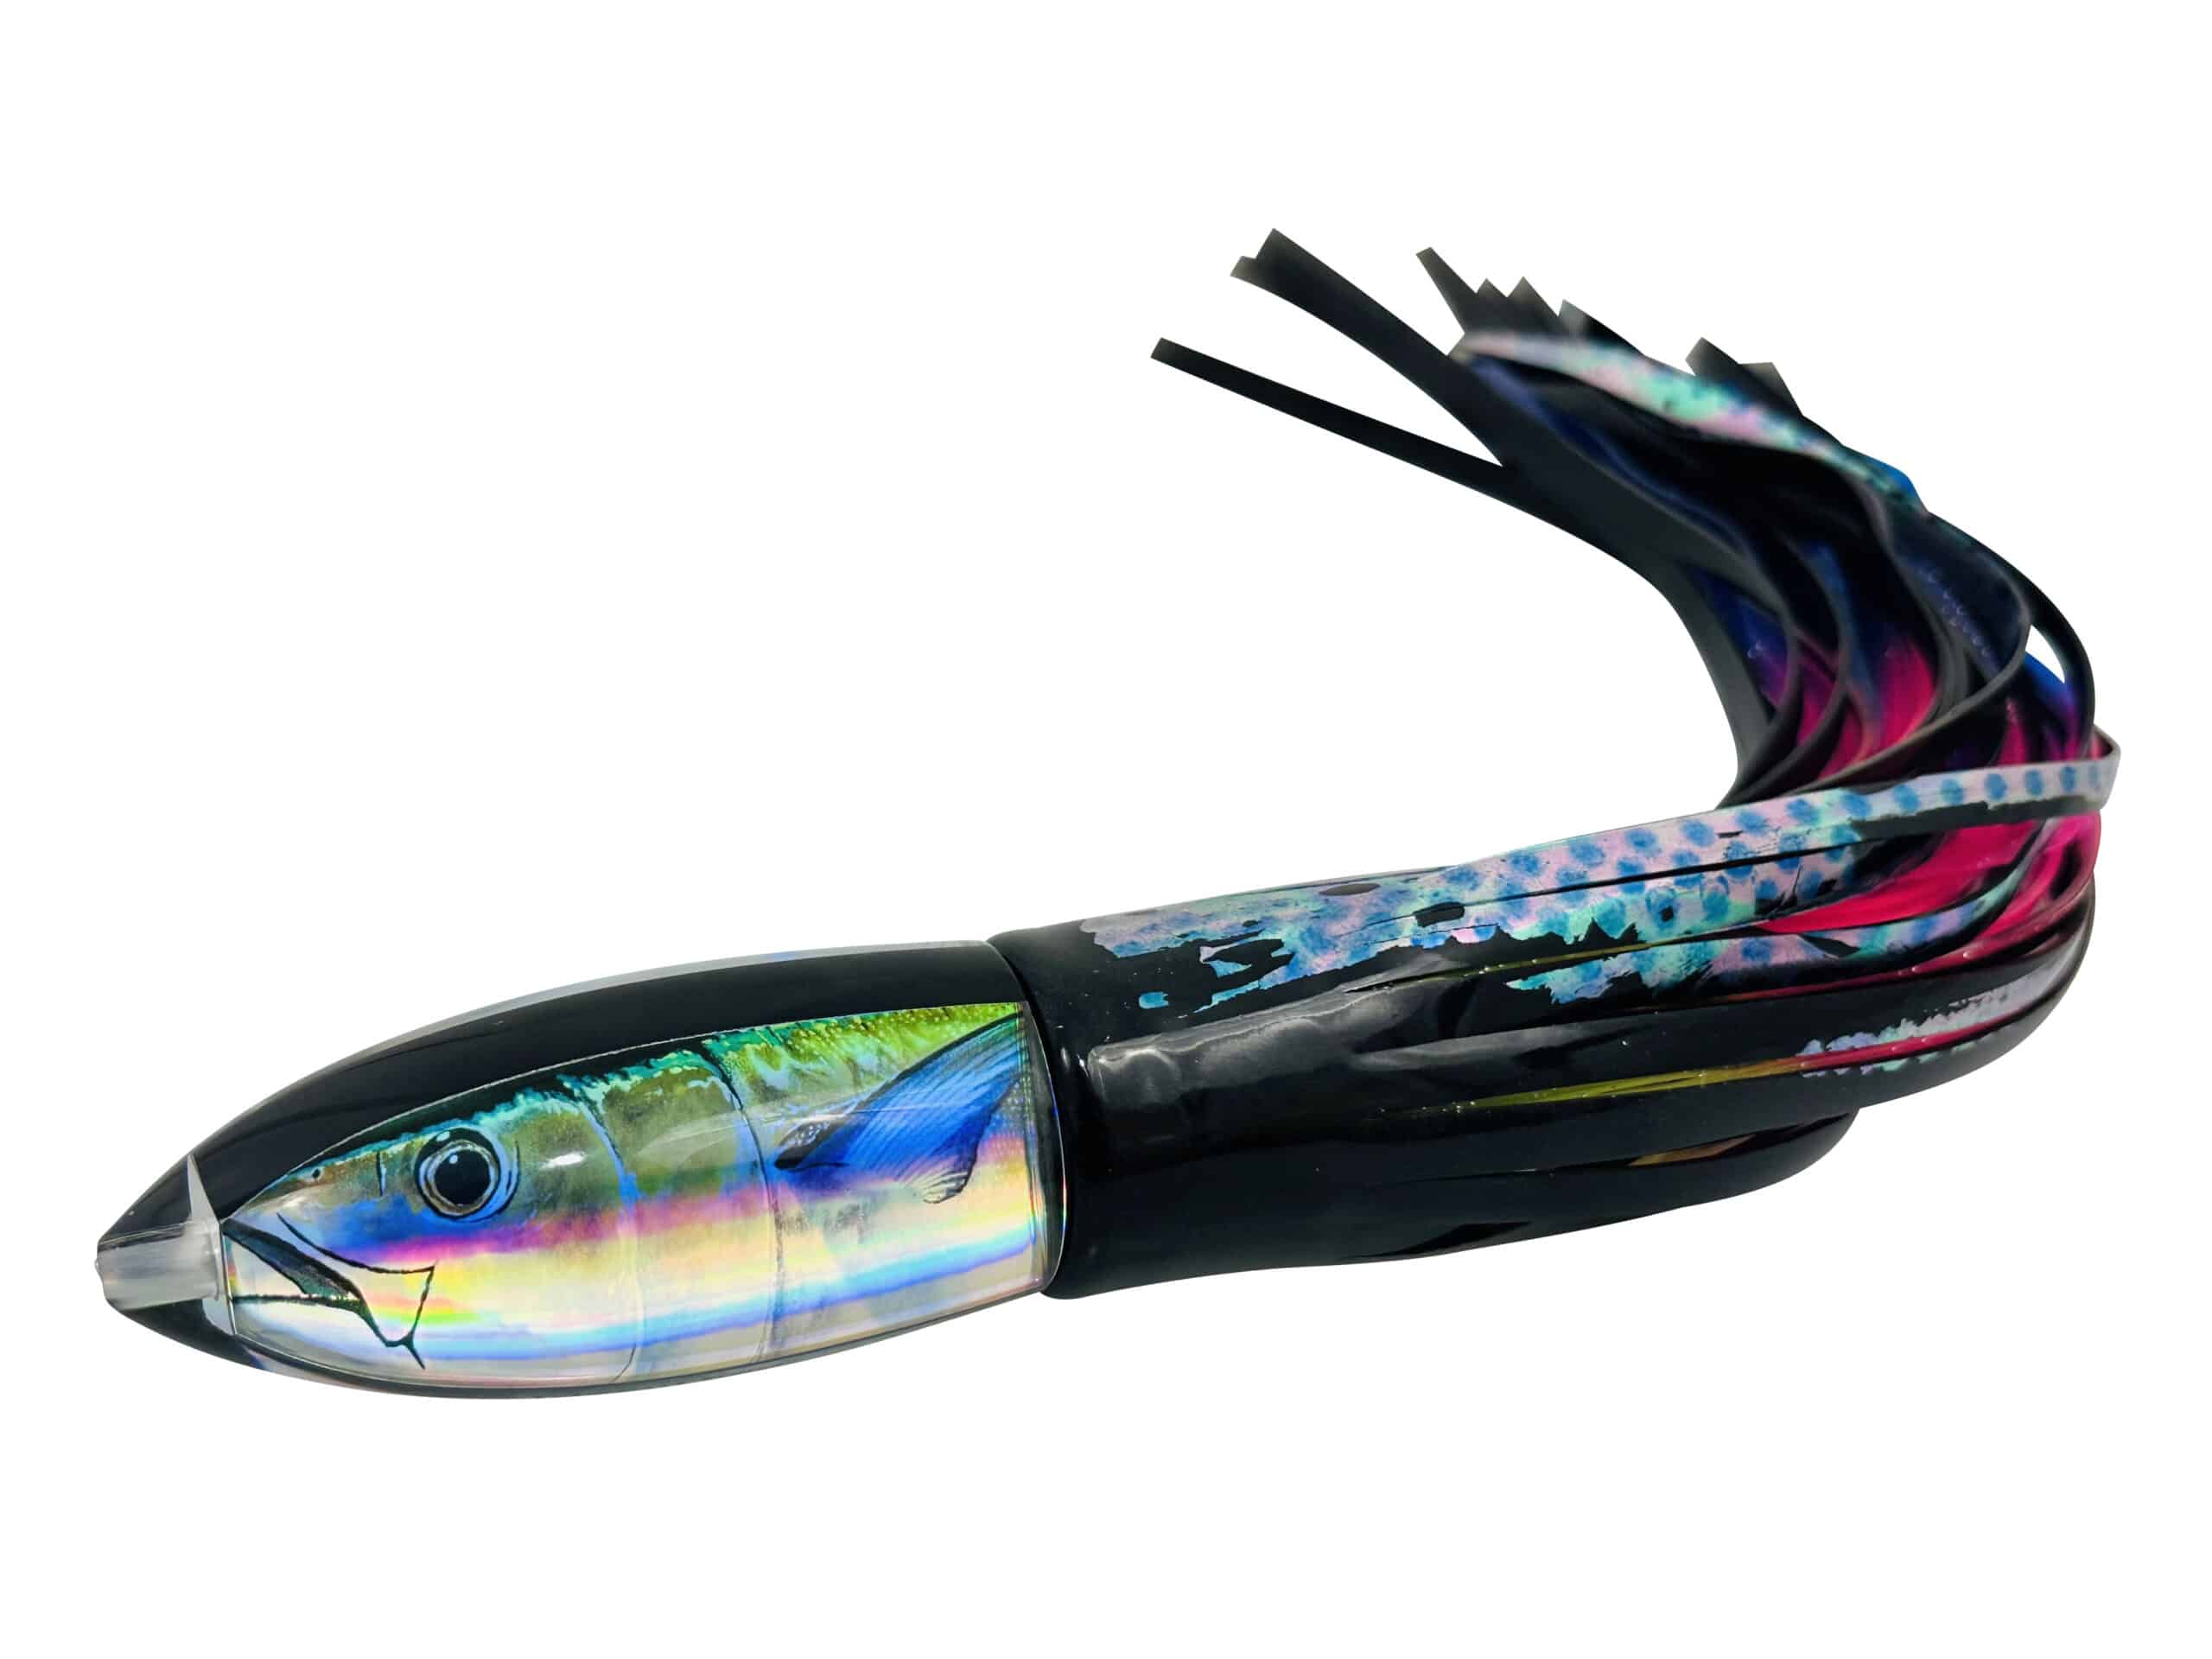 Tournament Wahoo Lures - MagBay Lures - Wahoo and Marlin Fishing Lures